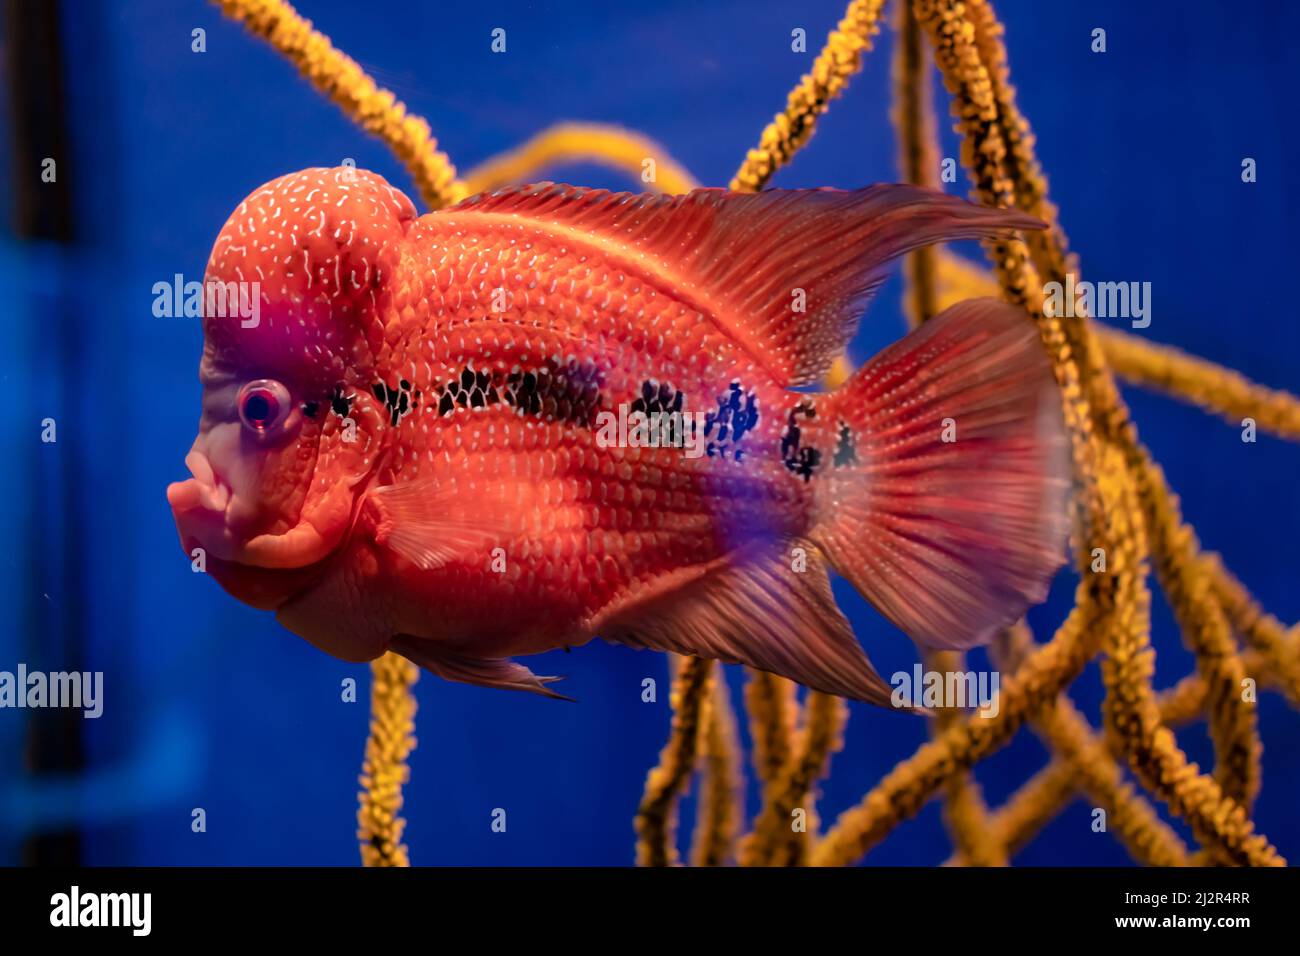 Sea red fish with a large forehead in an aquarium on a blue background. Stock Photo